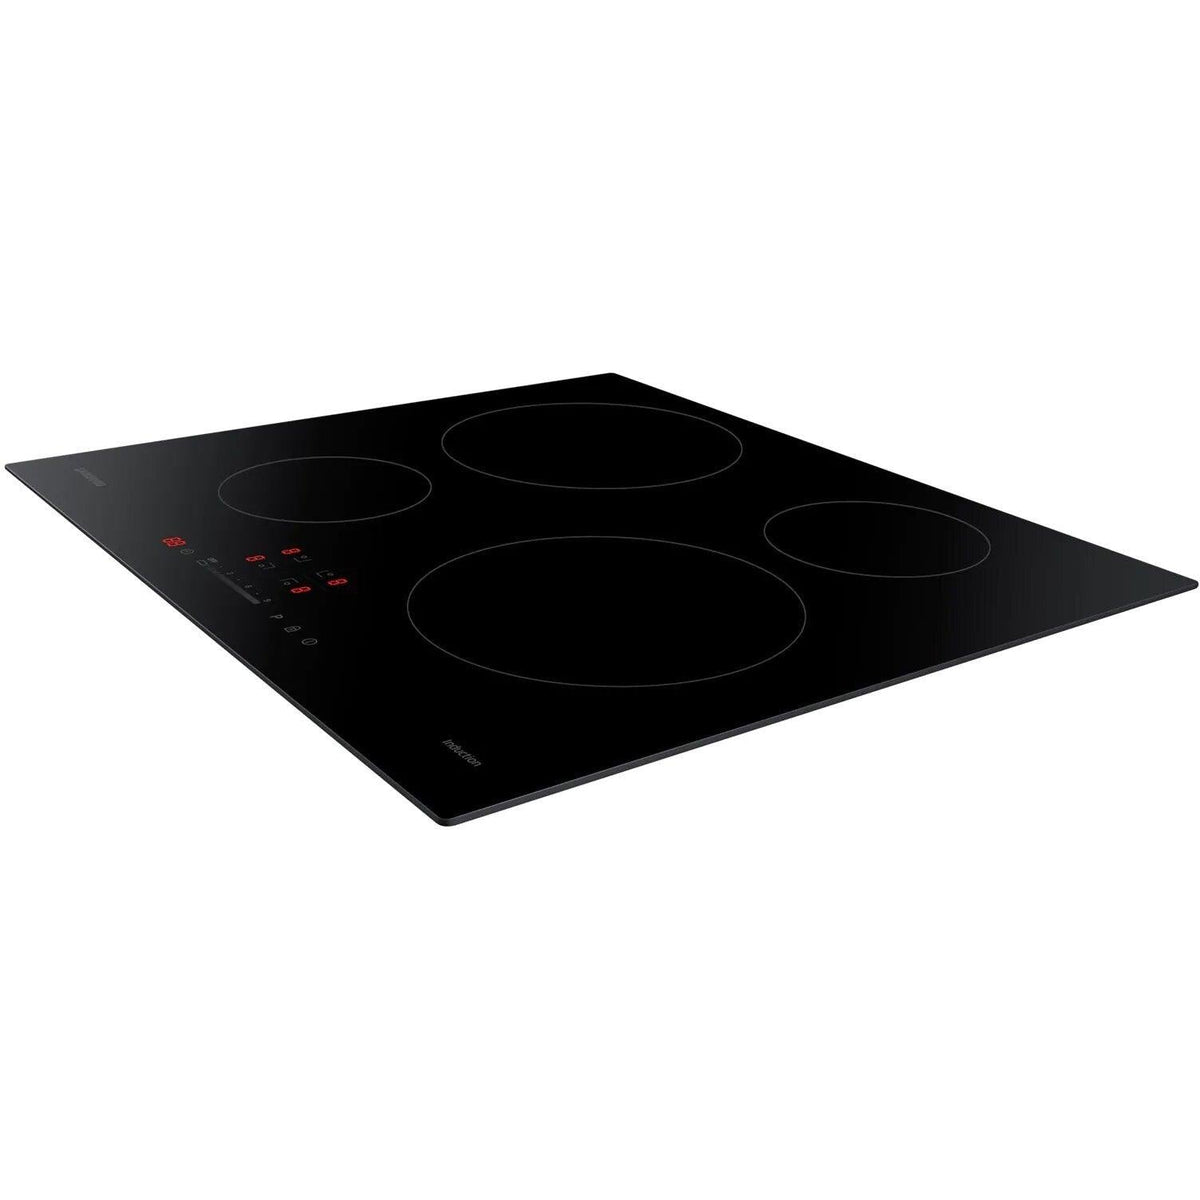 Samsung 60cm 4 Zone Built-In Induction Hob - Black | NZ64H37070K from DID Electrical - guaranteed Irish, guaranteed quality service. (6890820501692)